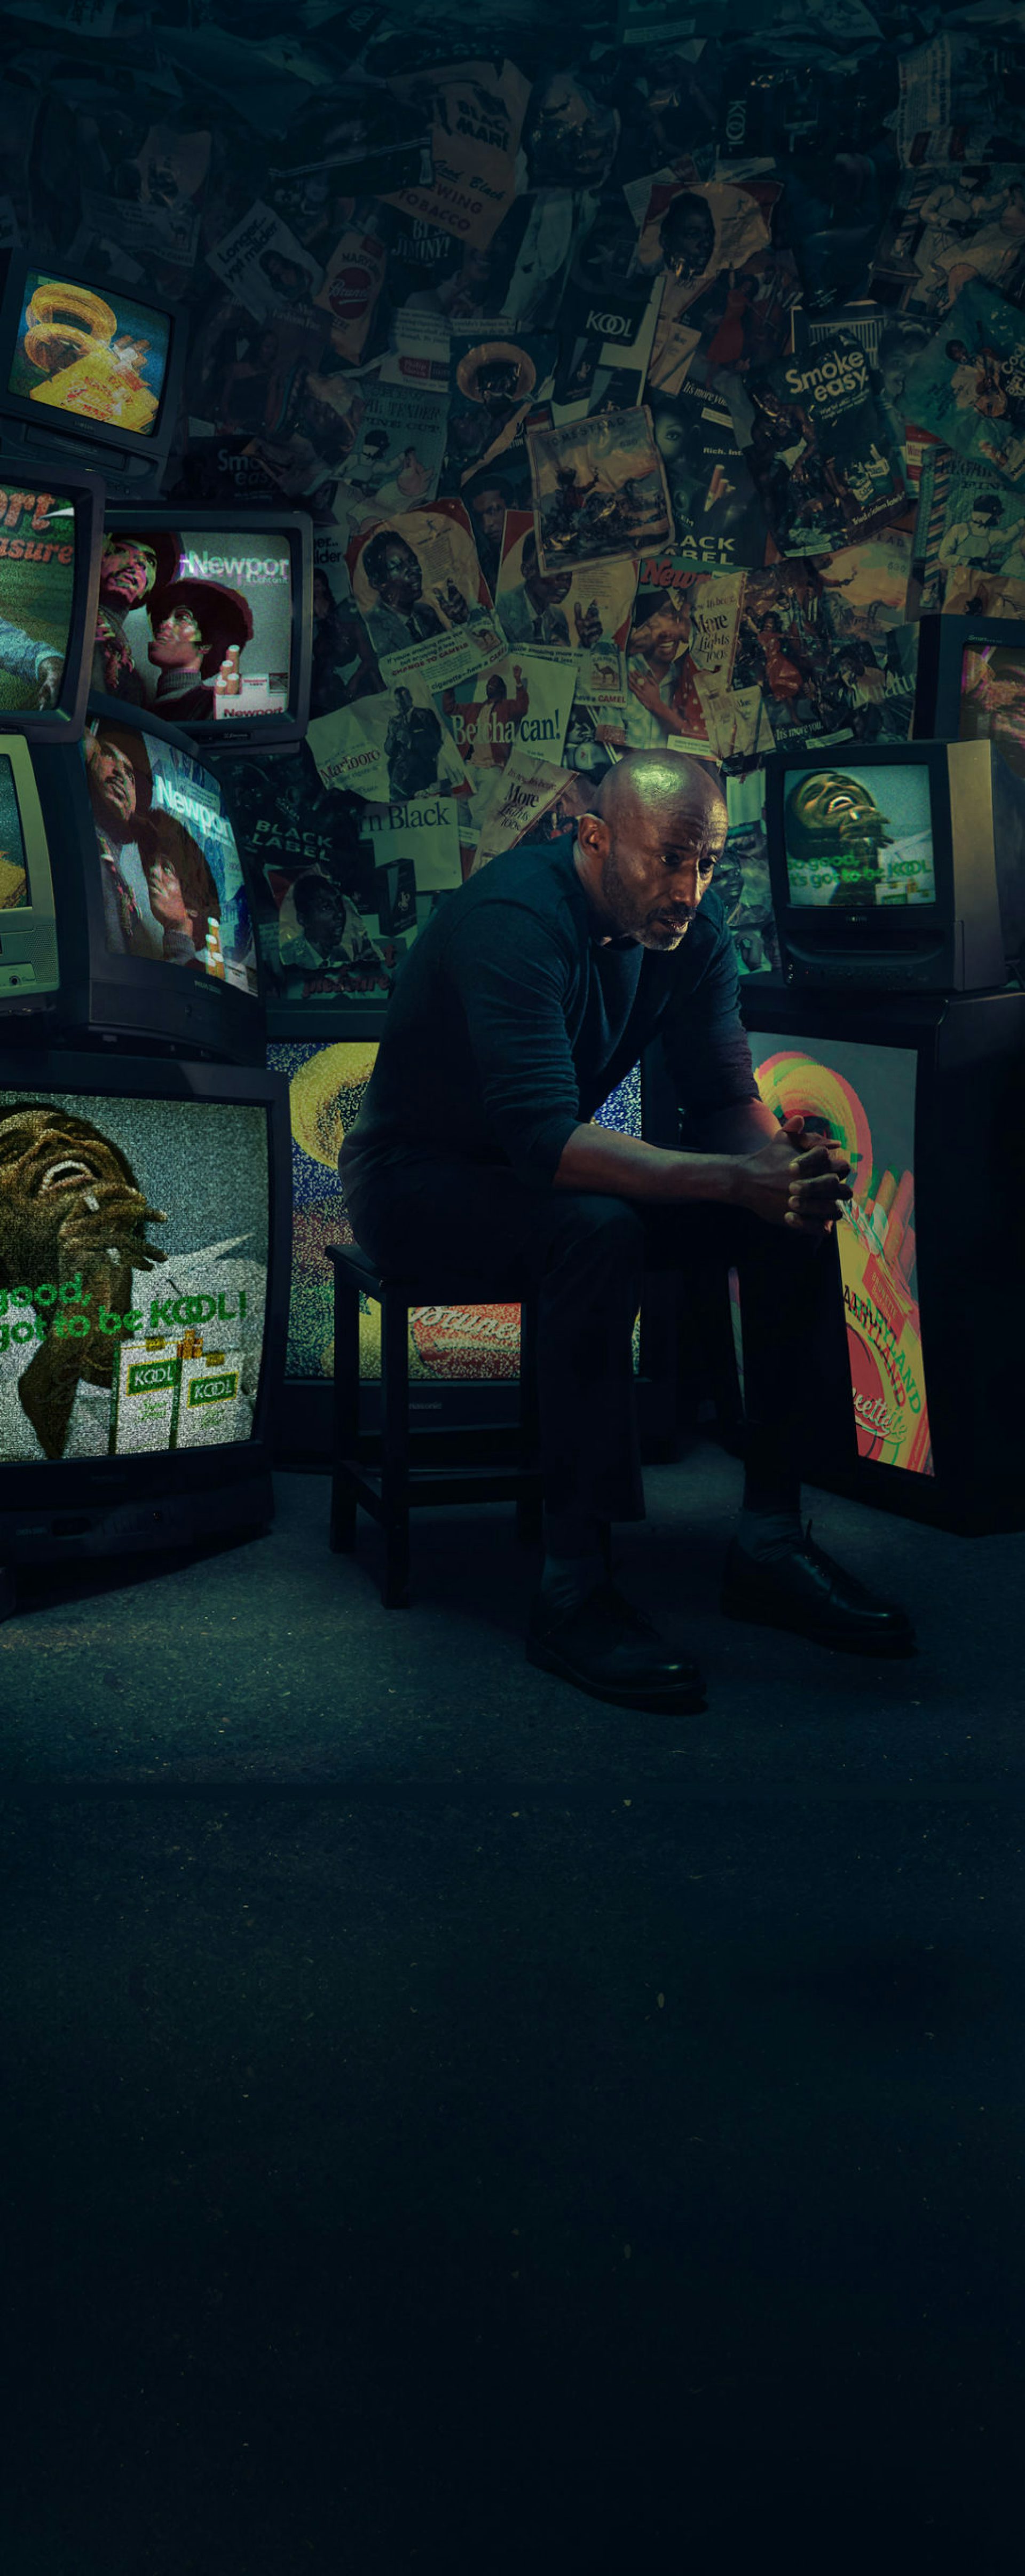 An African American/Black man sitting on a chair watching cigarette ads